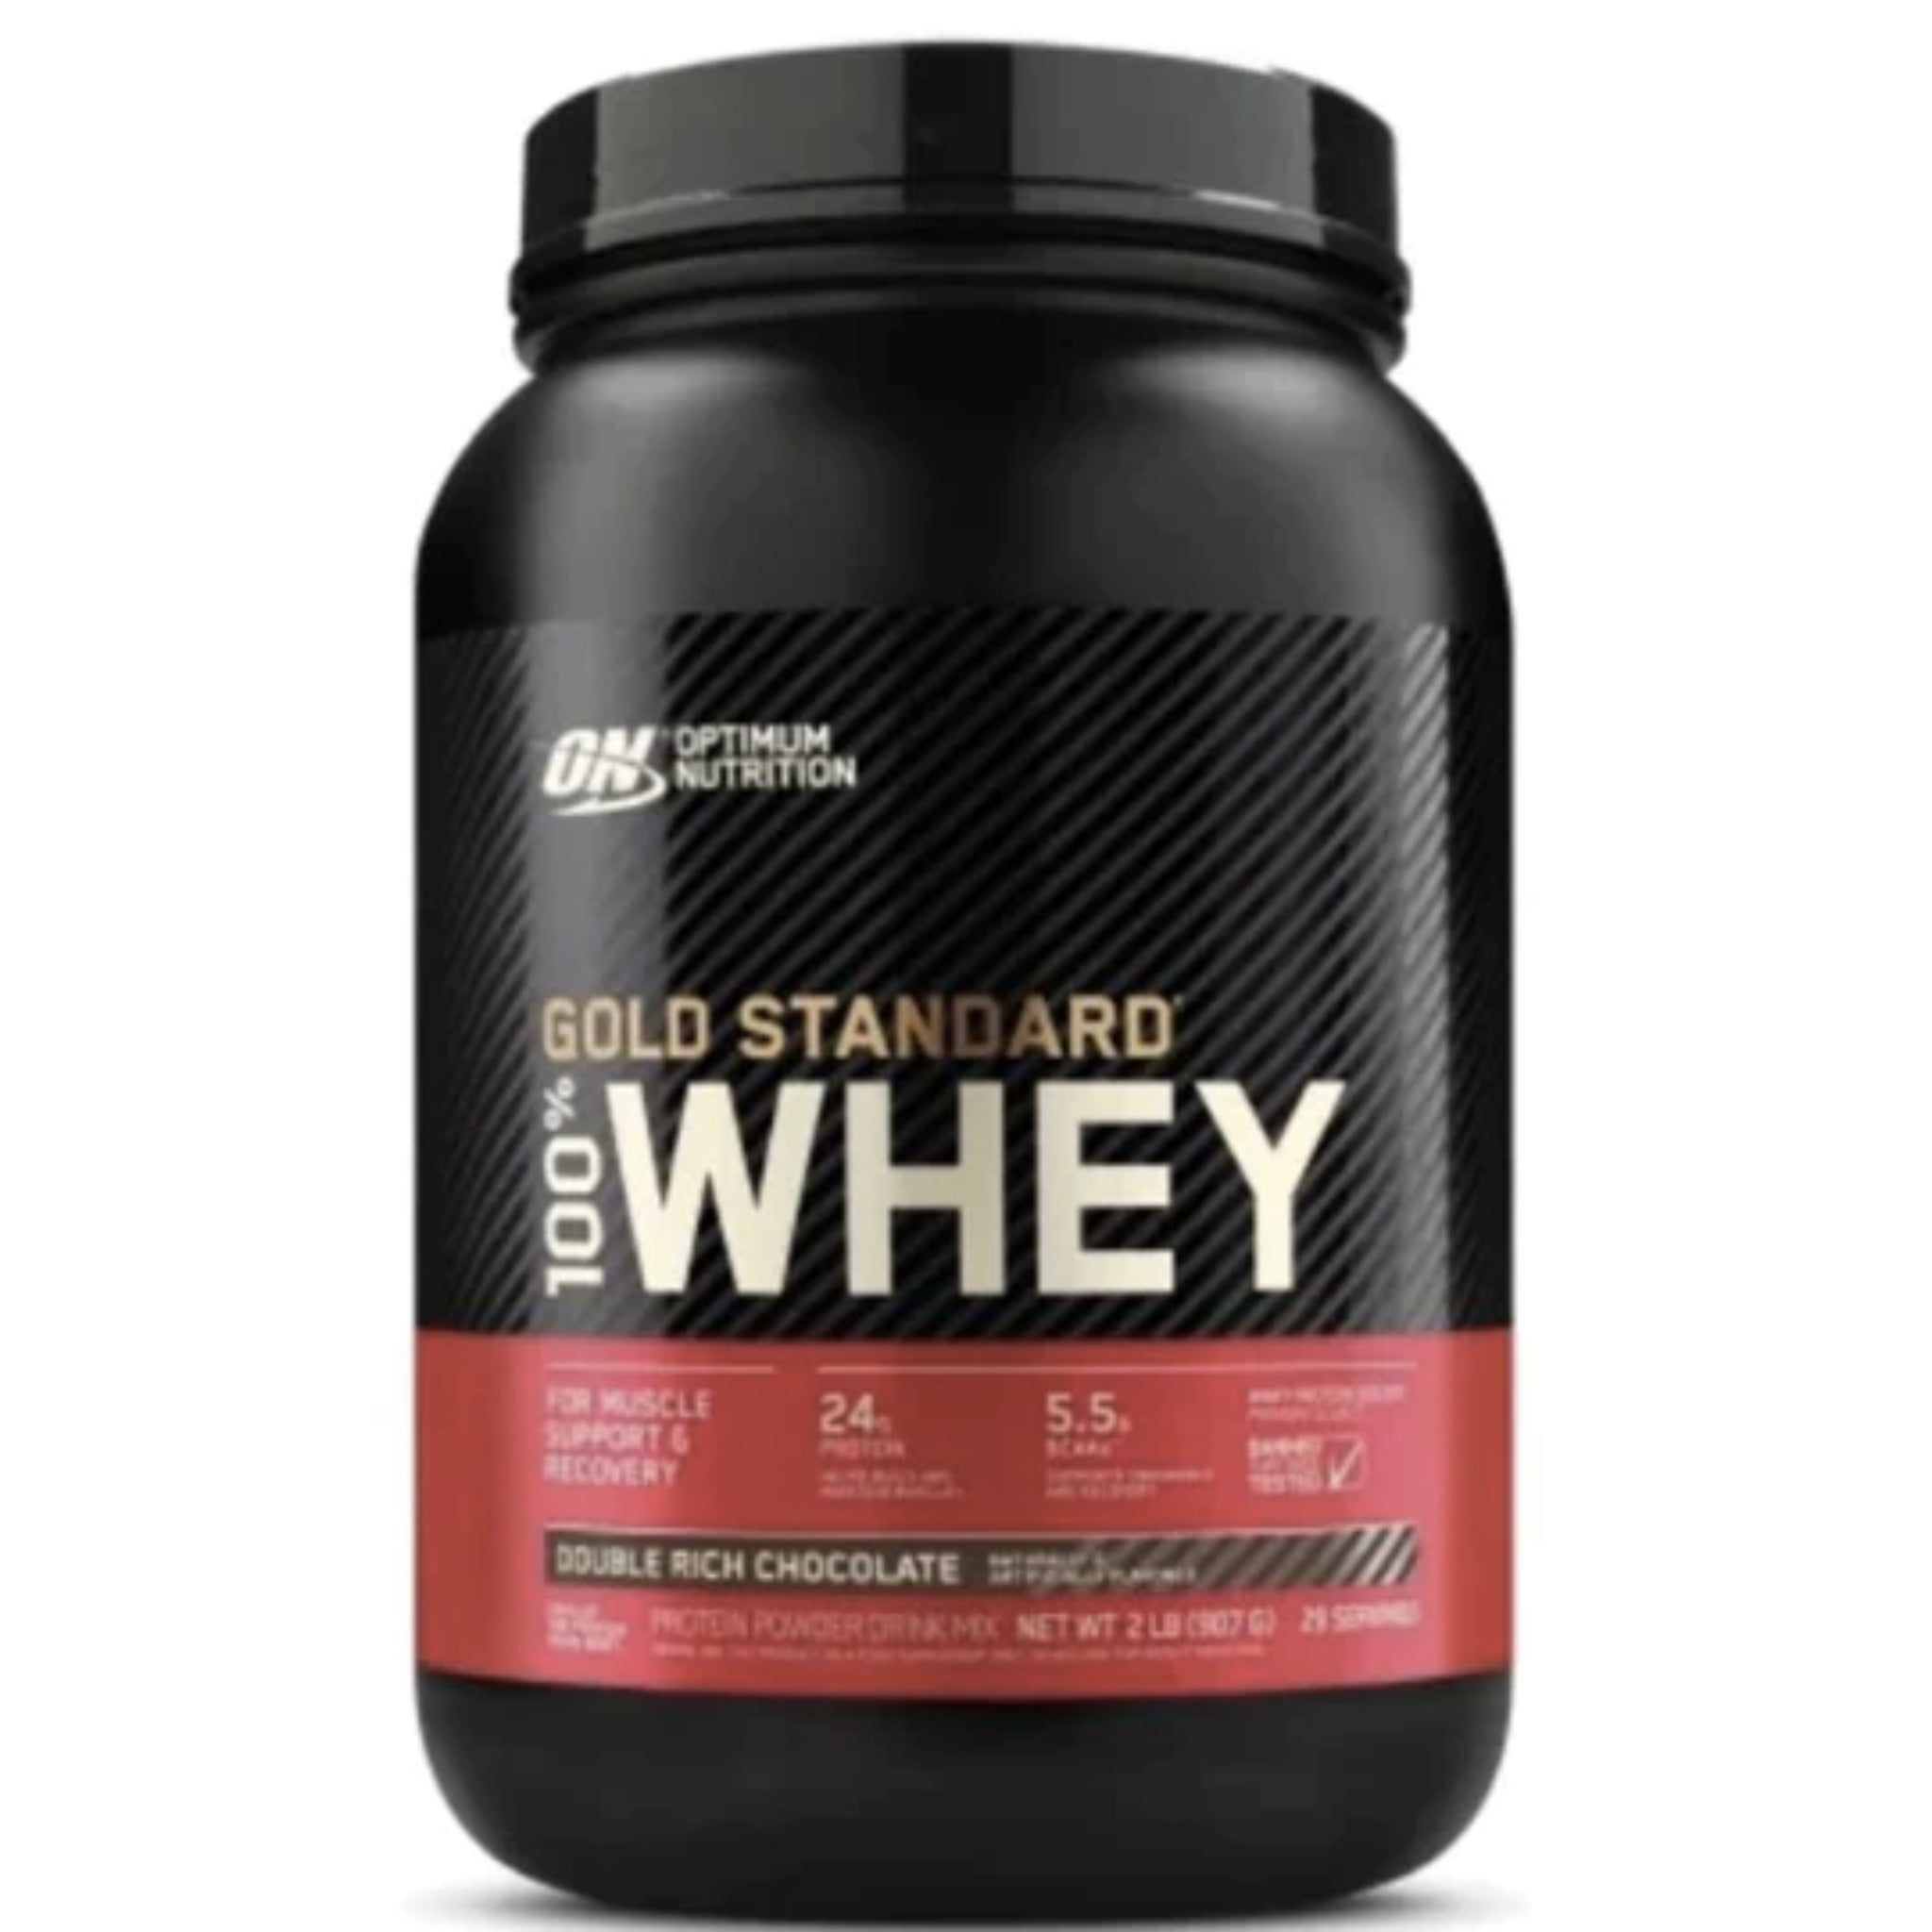 How much protein does a scoop of whey protein contain? - letsdiskuss